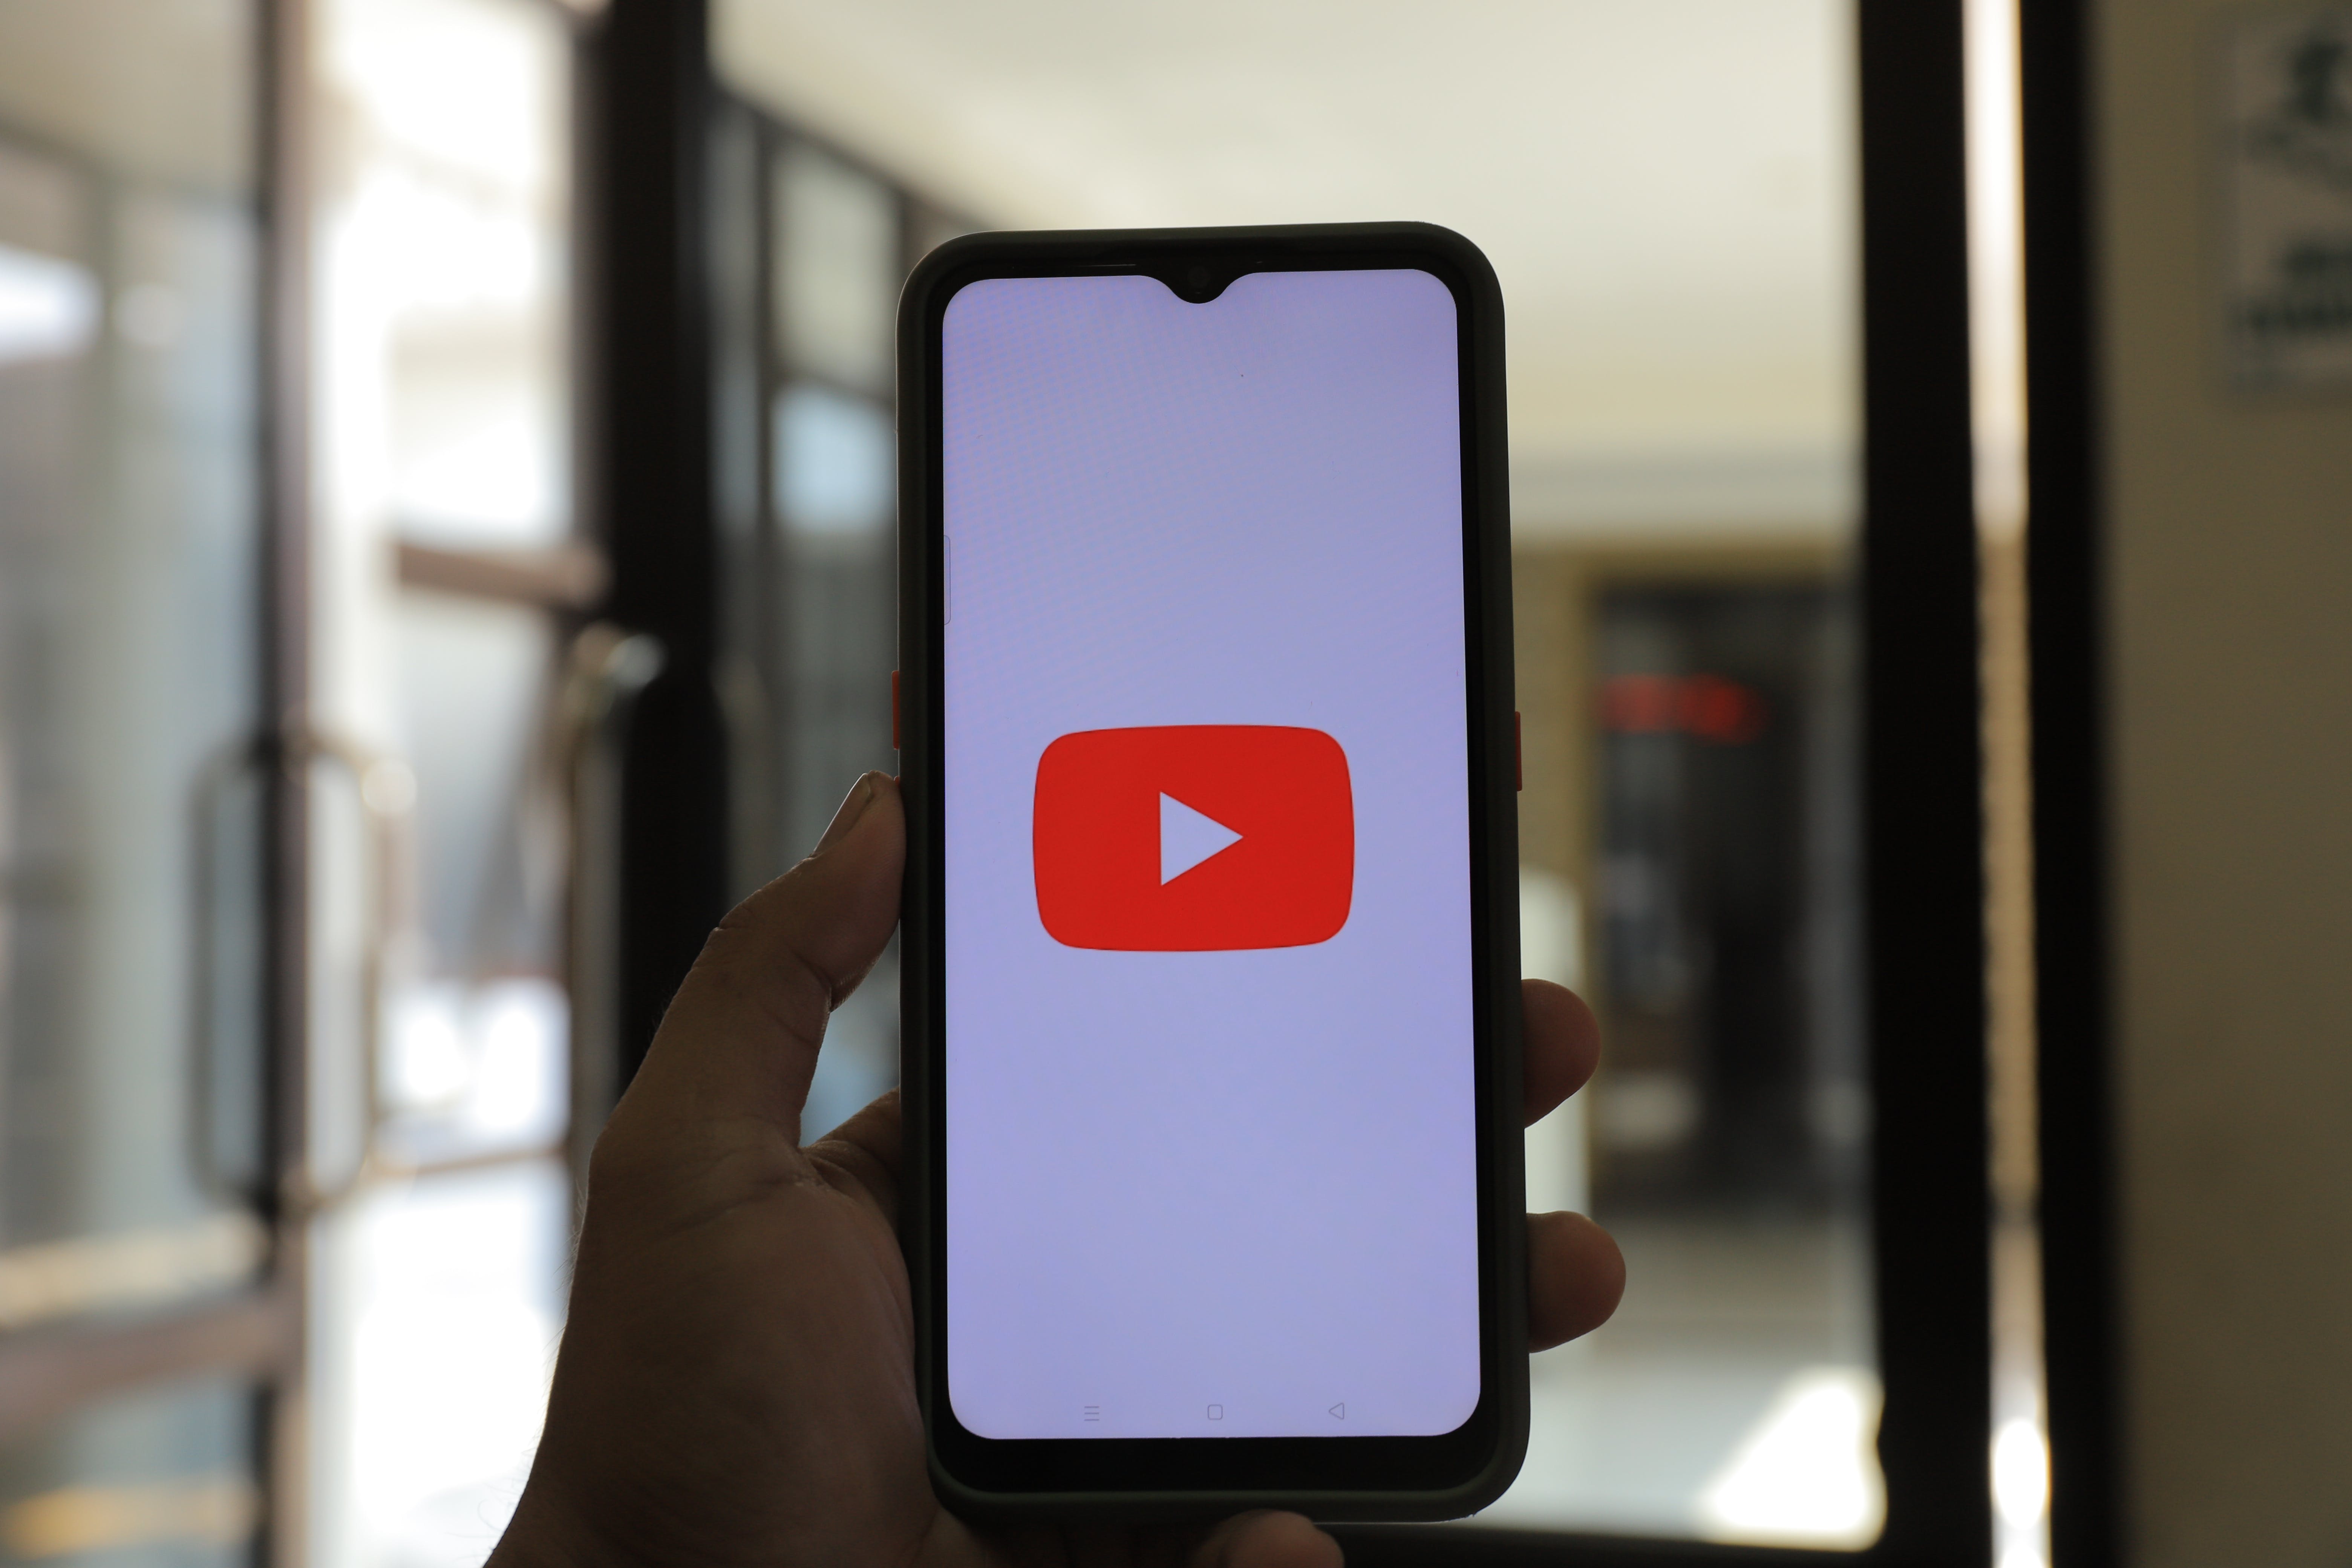 YouTubers will soon have to disclose use of AI tools or face suspension